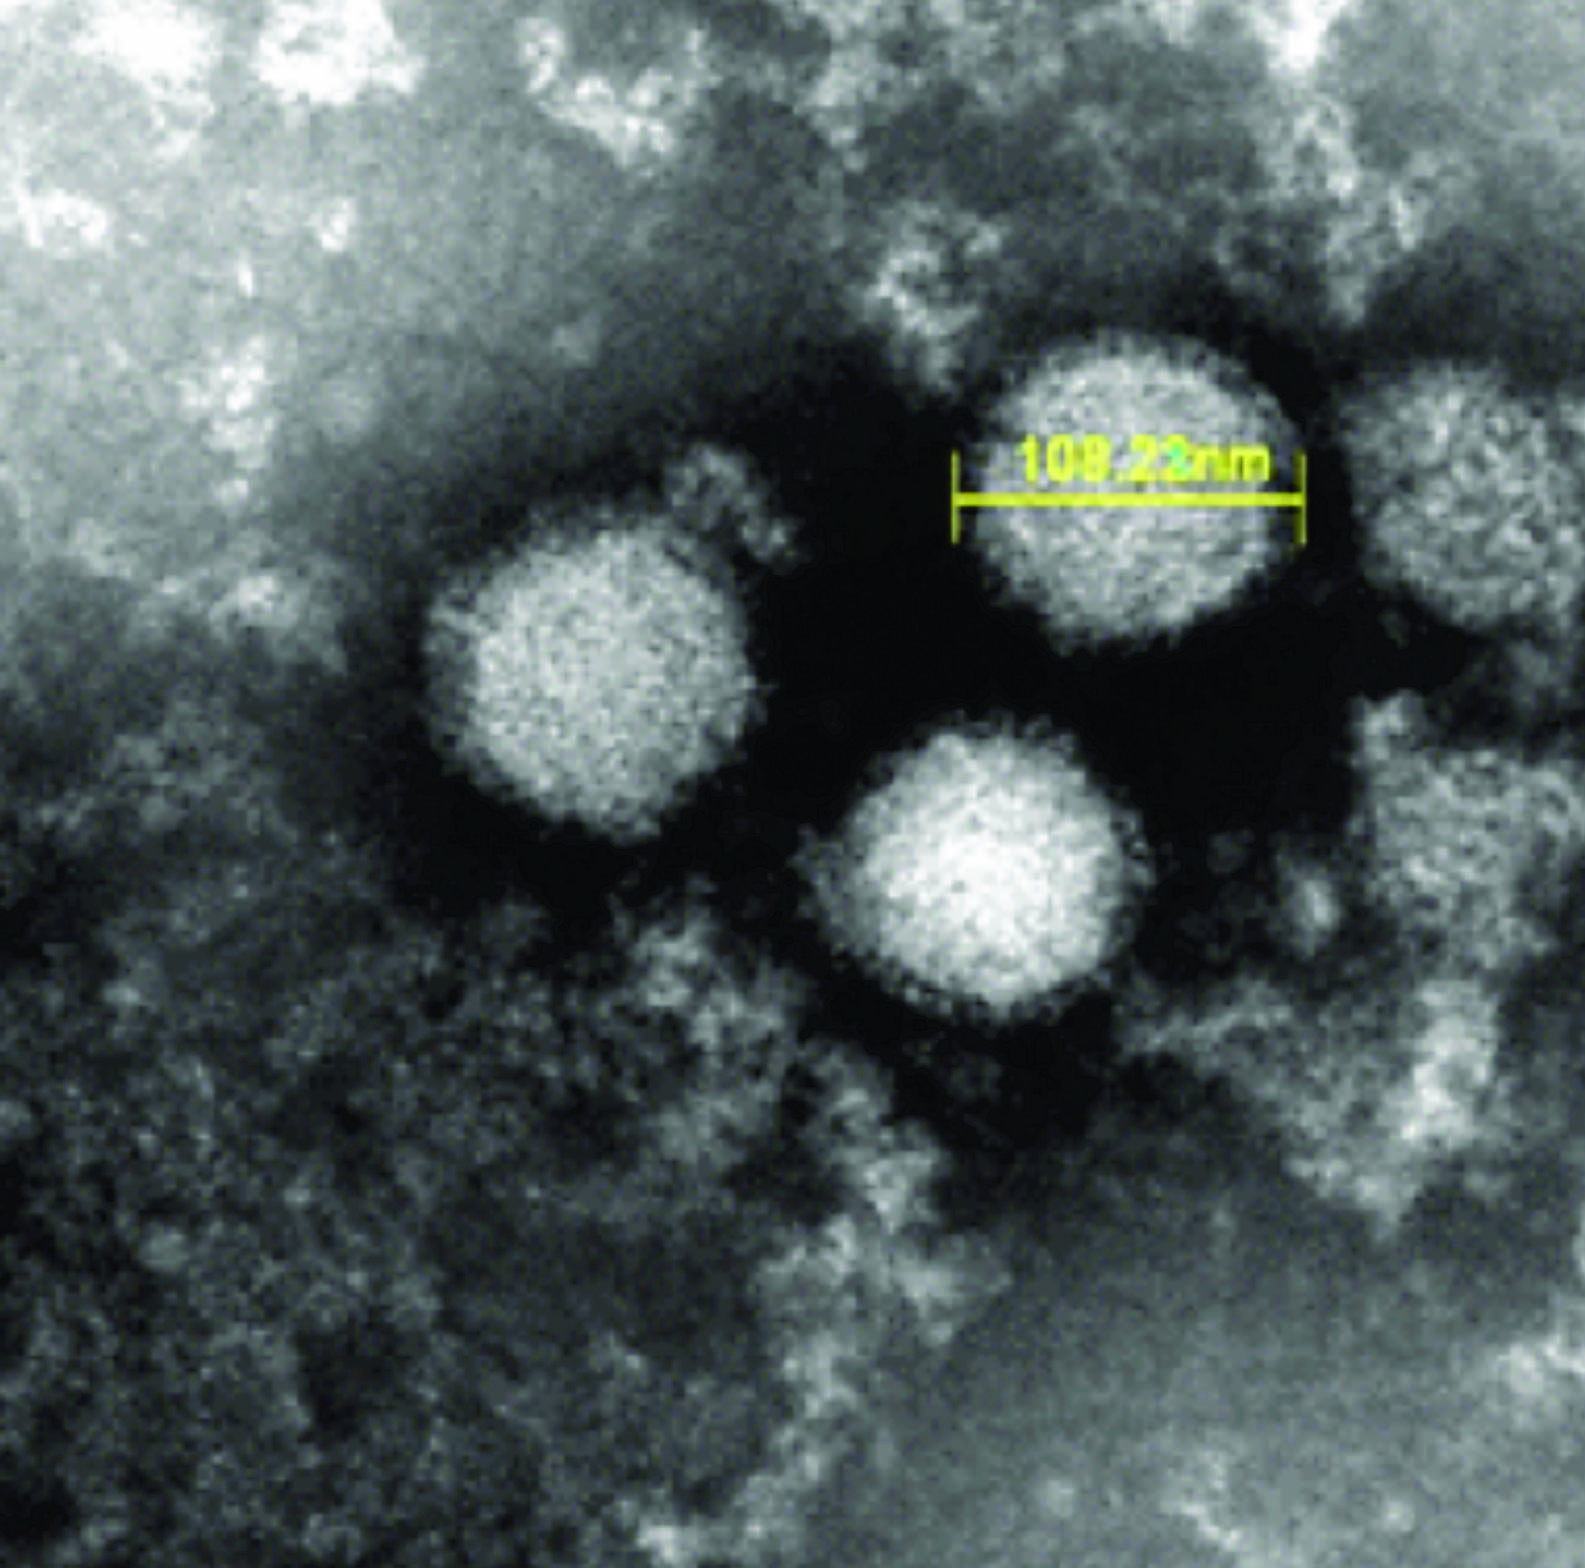 Image: A scanning electron micrograph (SEM) of severe fever with thrombocytopenia syndrome virus (Photo courtesy of the Japanese National Institute of Infectious Diseases).